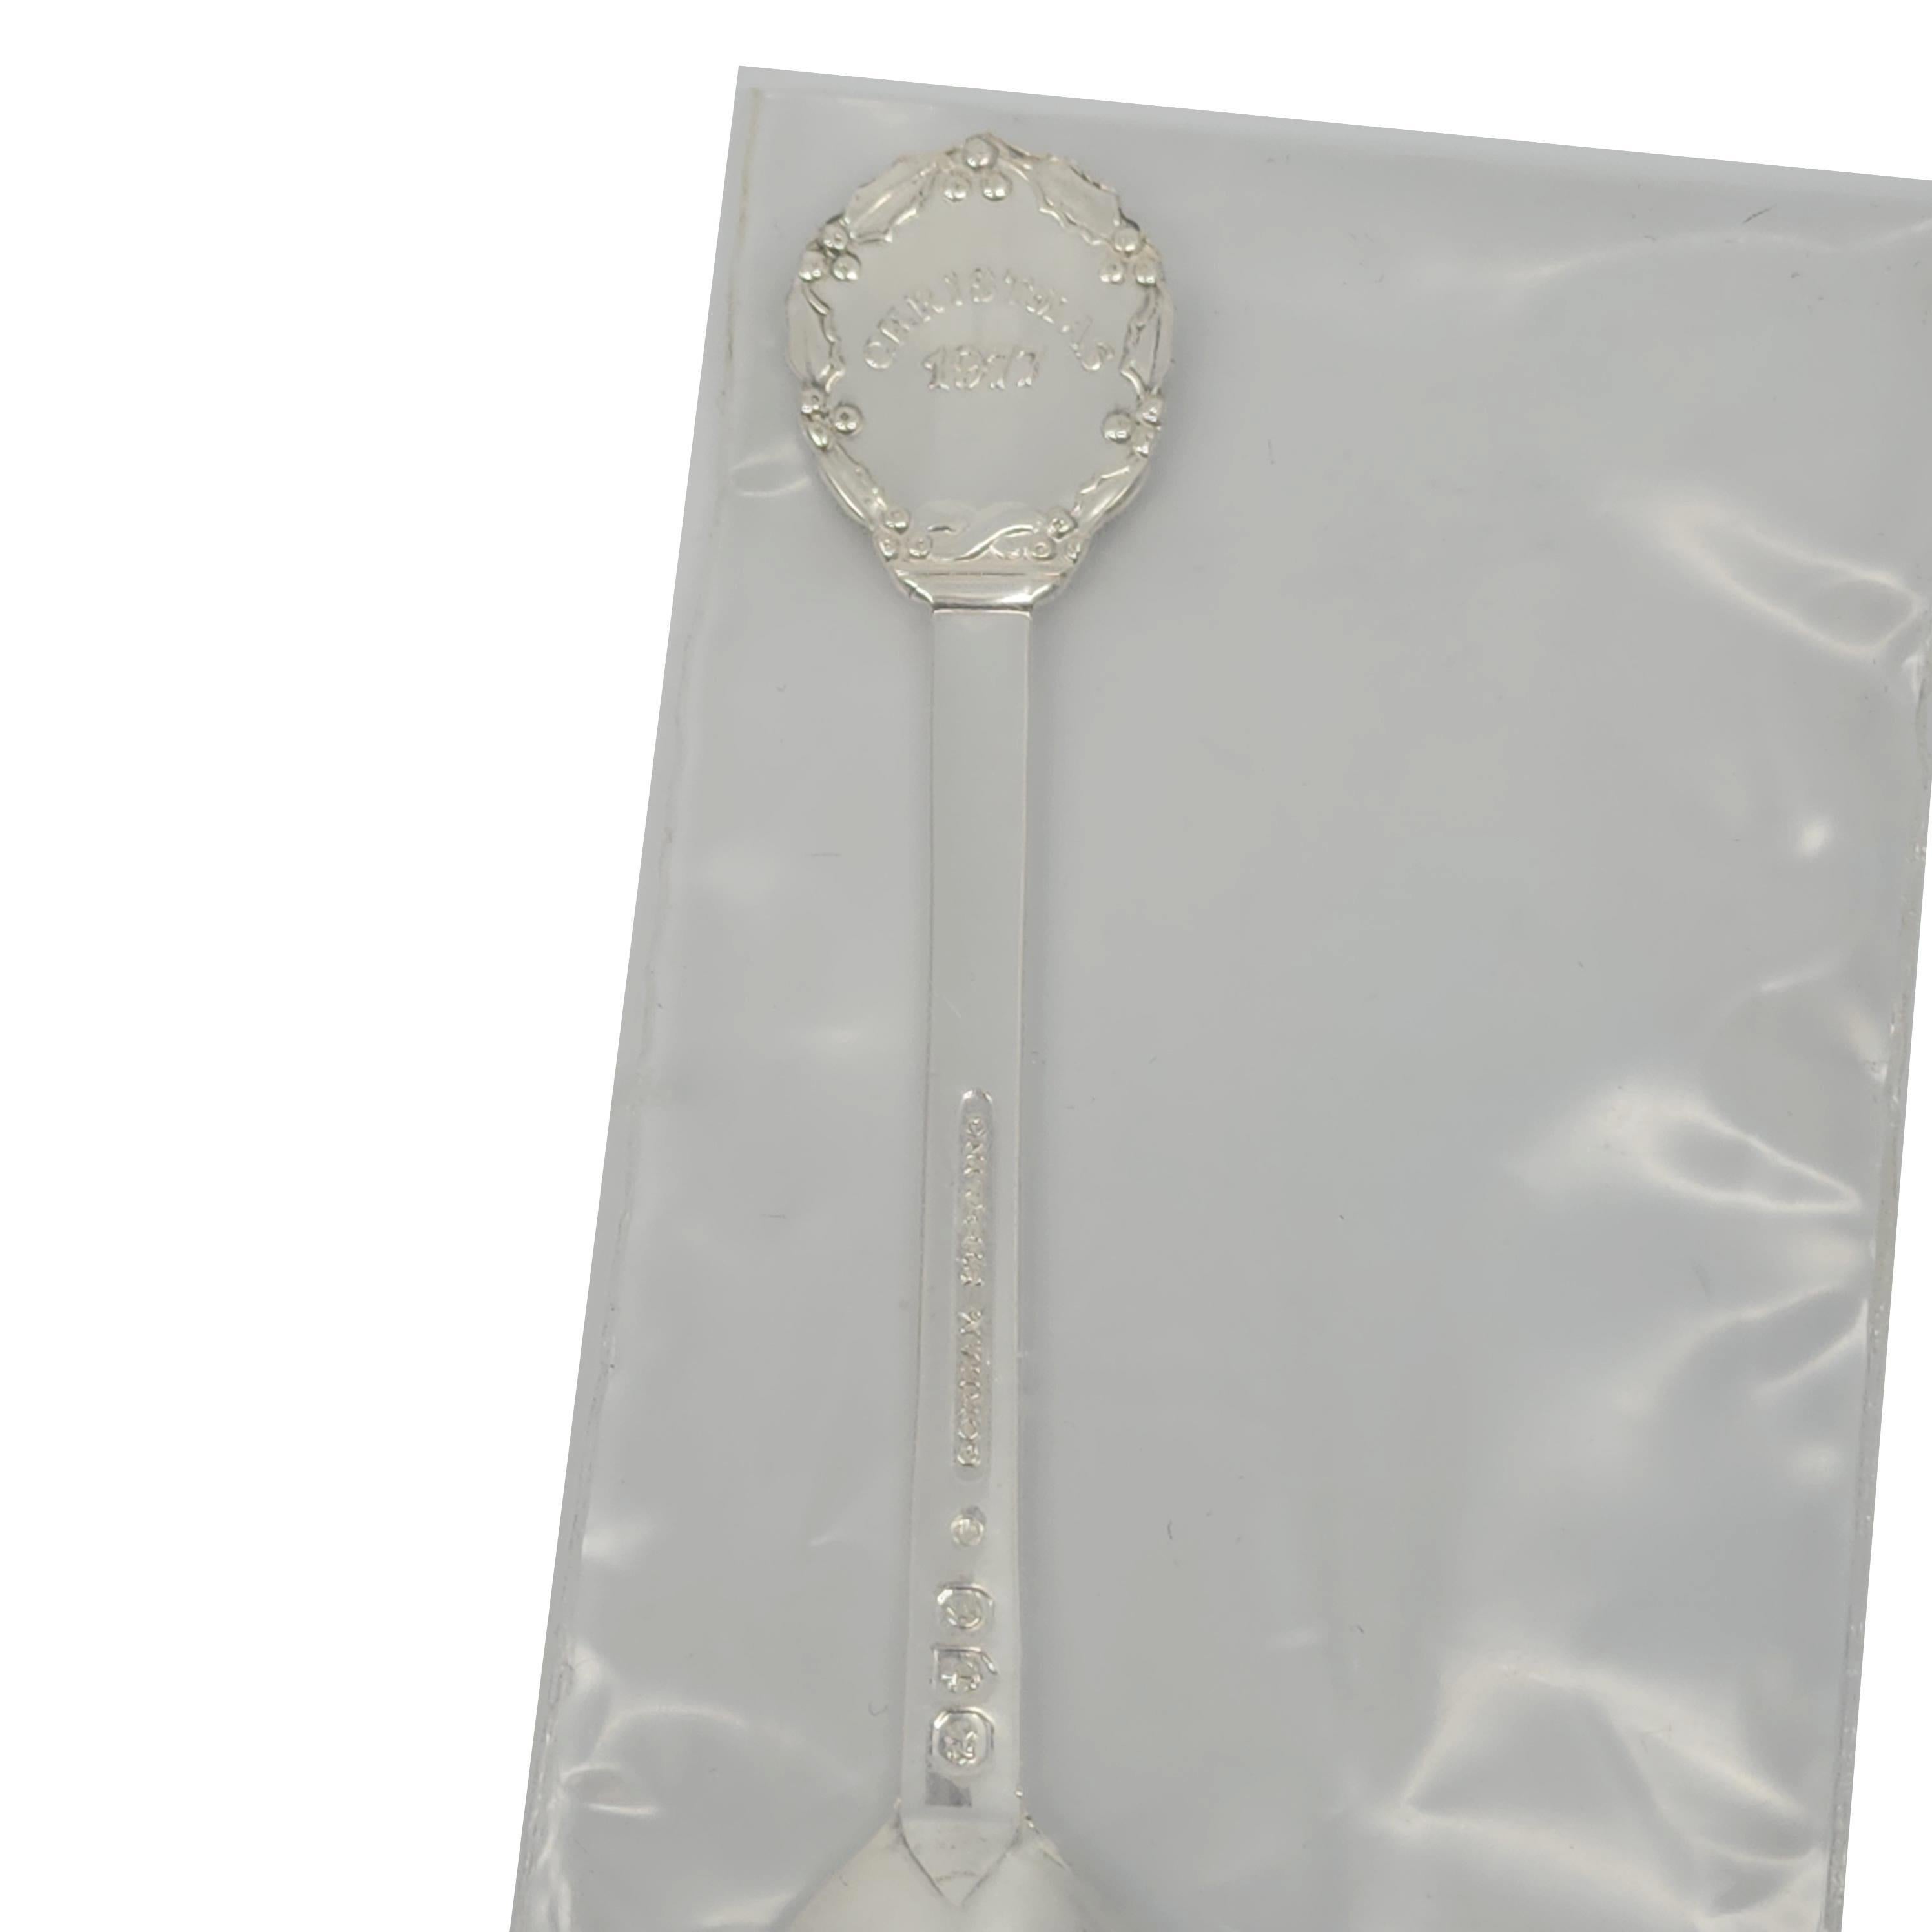 Gorham Sterling Silver 1977 Christmas Spoon Sealed with Box #15798 In Excellent Condition For Sale In Washington Depot, CT